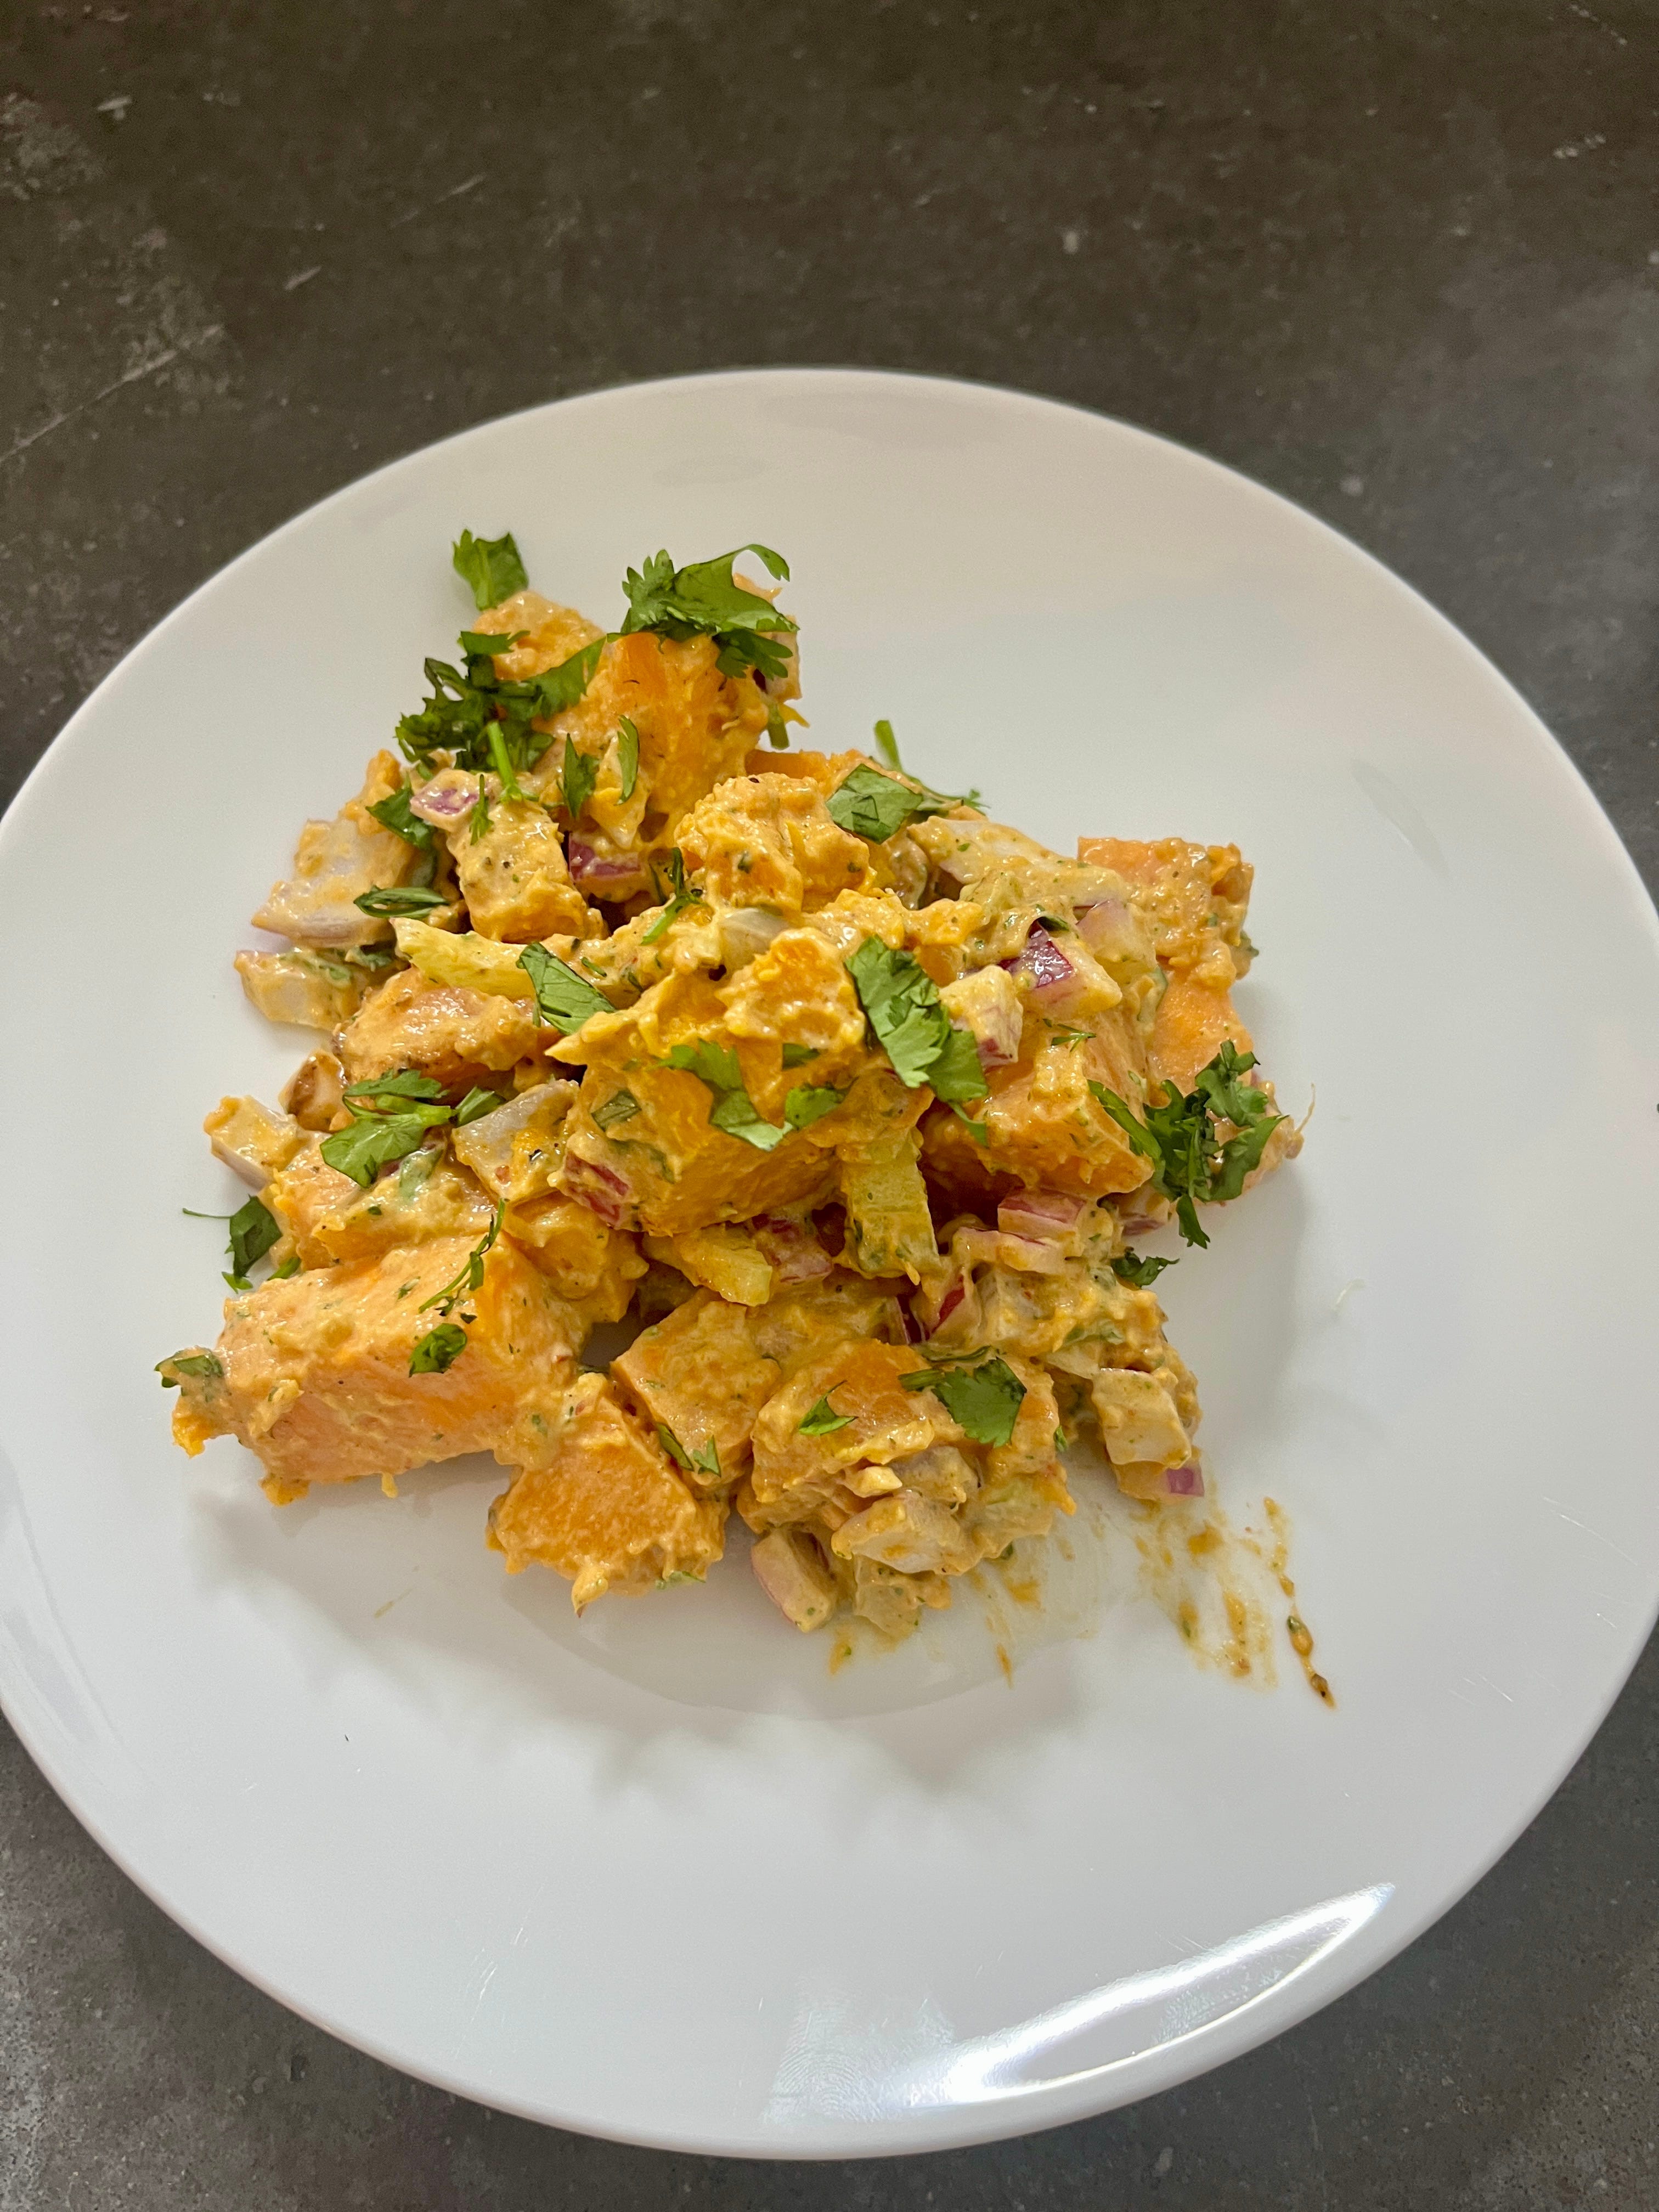 Spicy Chipotle Sweet Potato Chopped Salad